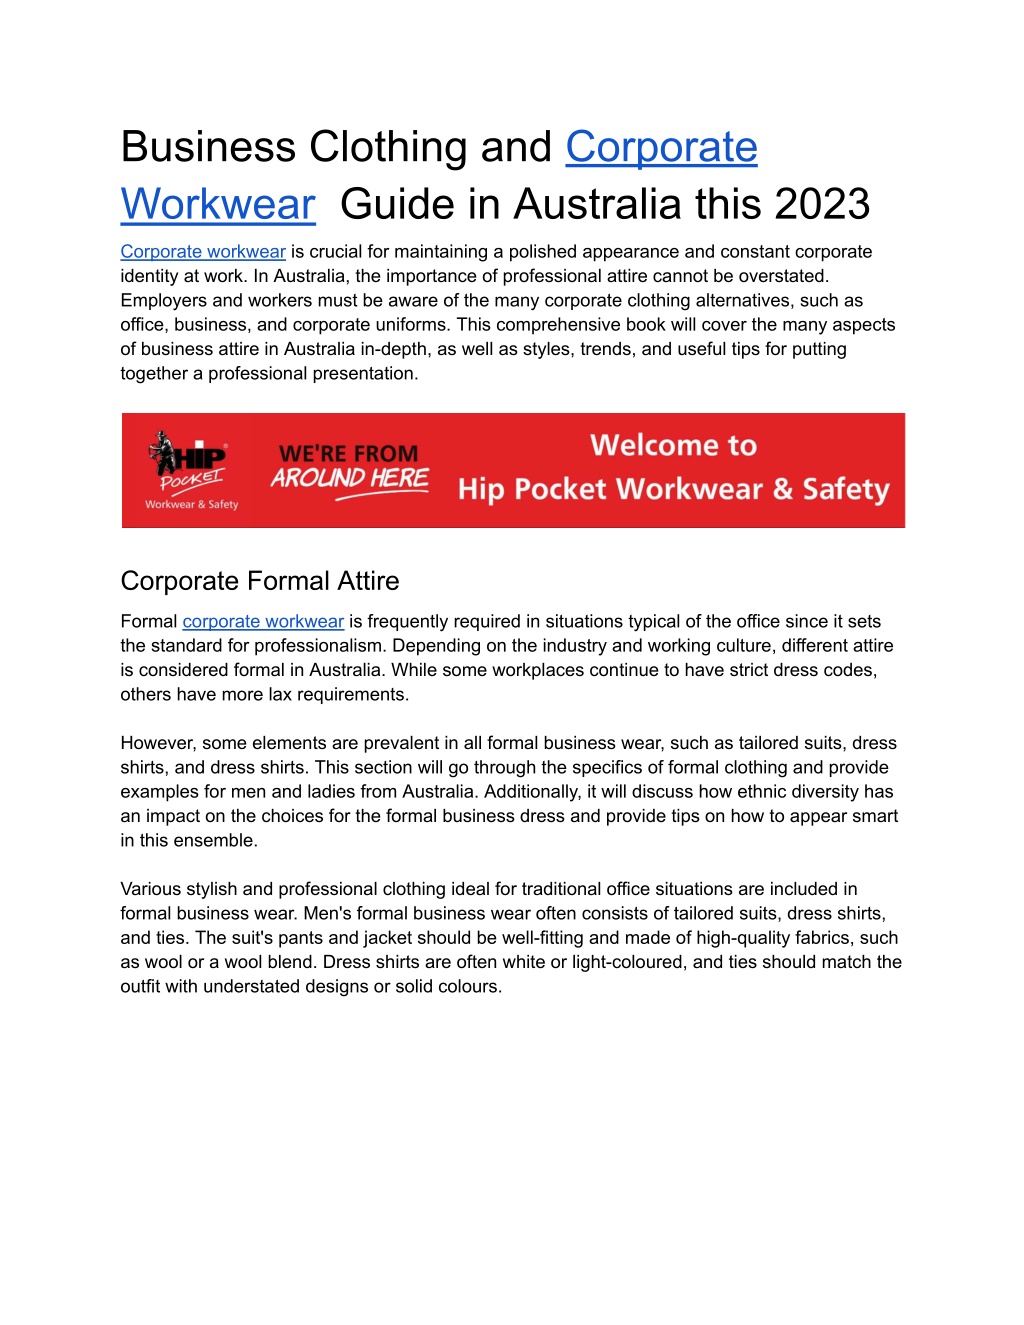 PPT - Business Clothing and Corporate Workwear Guide in Australia this ...